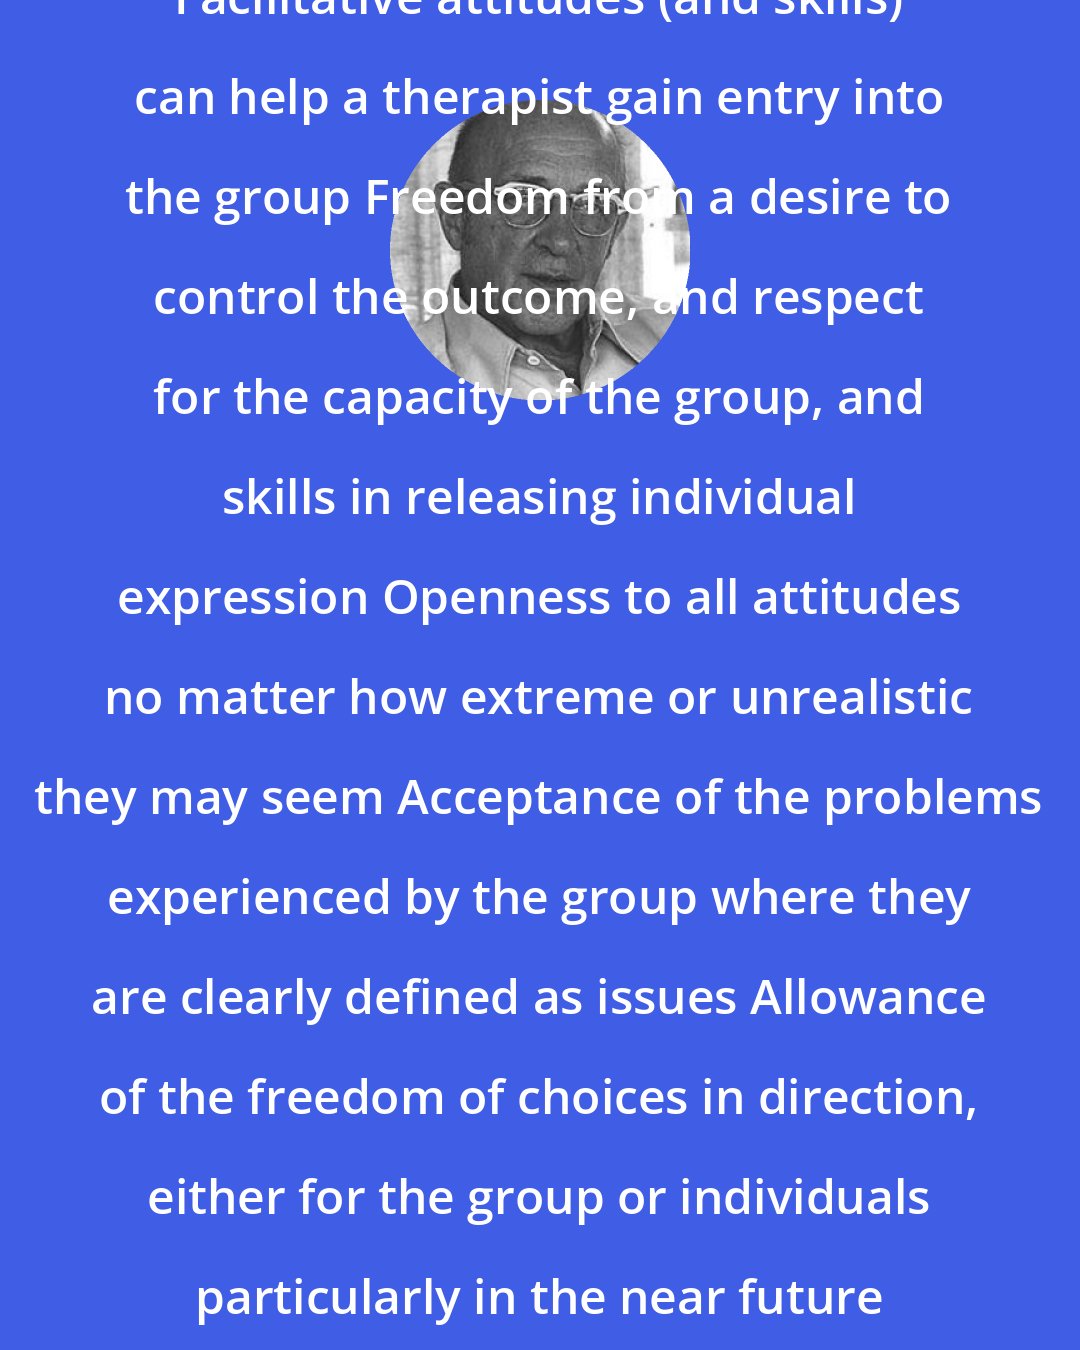 Carl Rogers: Facilitative attitudes (and skills) can help a therapist gain entry into the group Freedom from a desire to control the outcome, and respect for the capacity of the group, and skills in releasing individual expression Openness to all attitudes no matter how extreme or unrealistic they may seem Acceptance of the problems experienced by the group where they are clearly defined as issues Allowance of the freedom of choices in direction, either for the group or individuals particularly in the near future